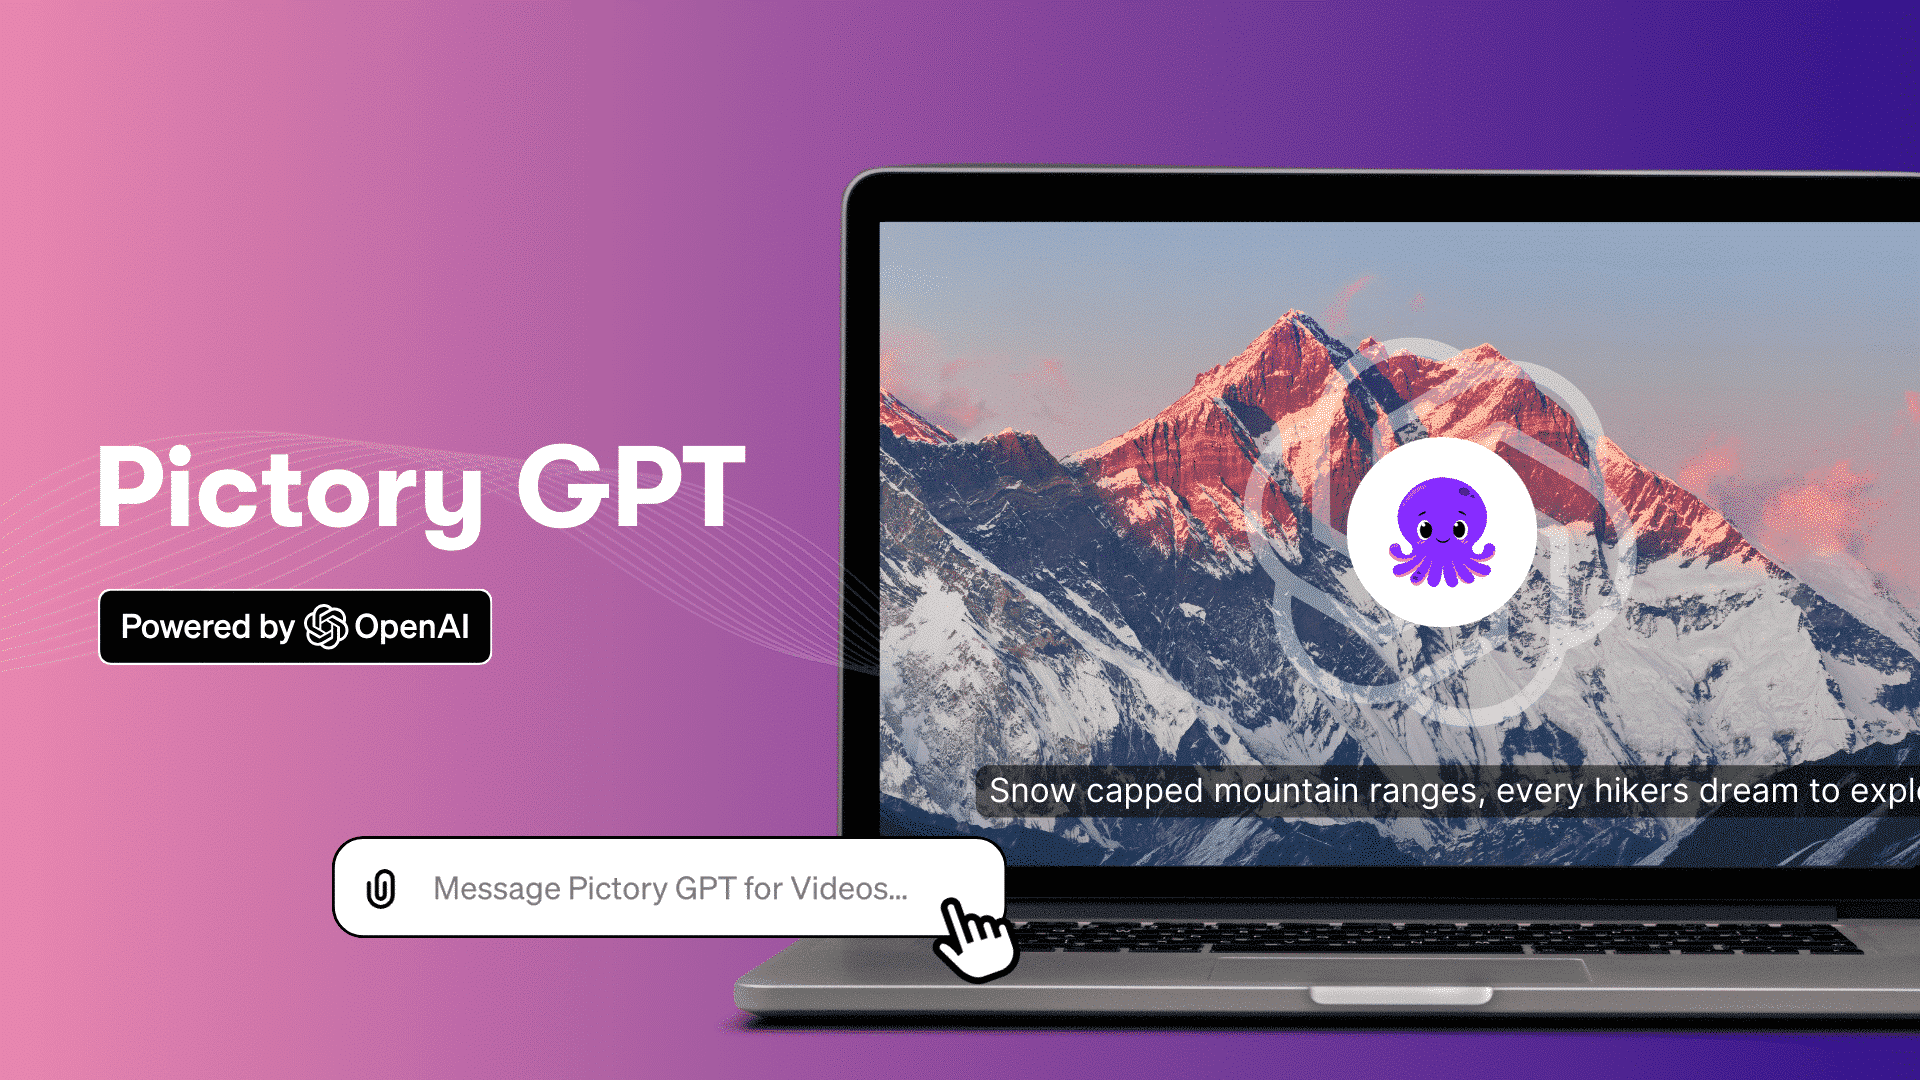 Pictory GPT for Videos launch